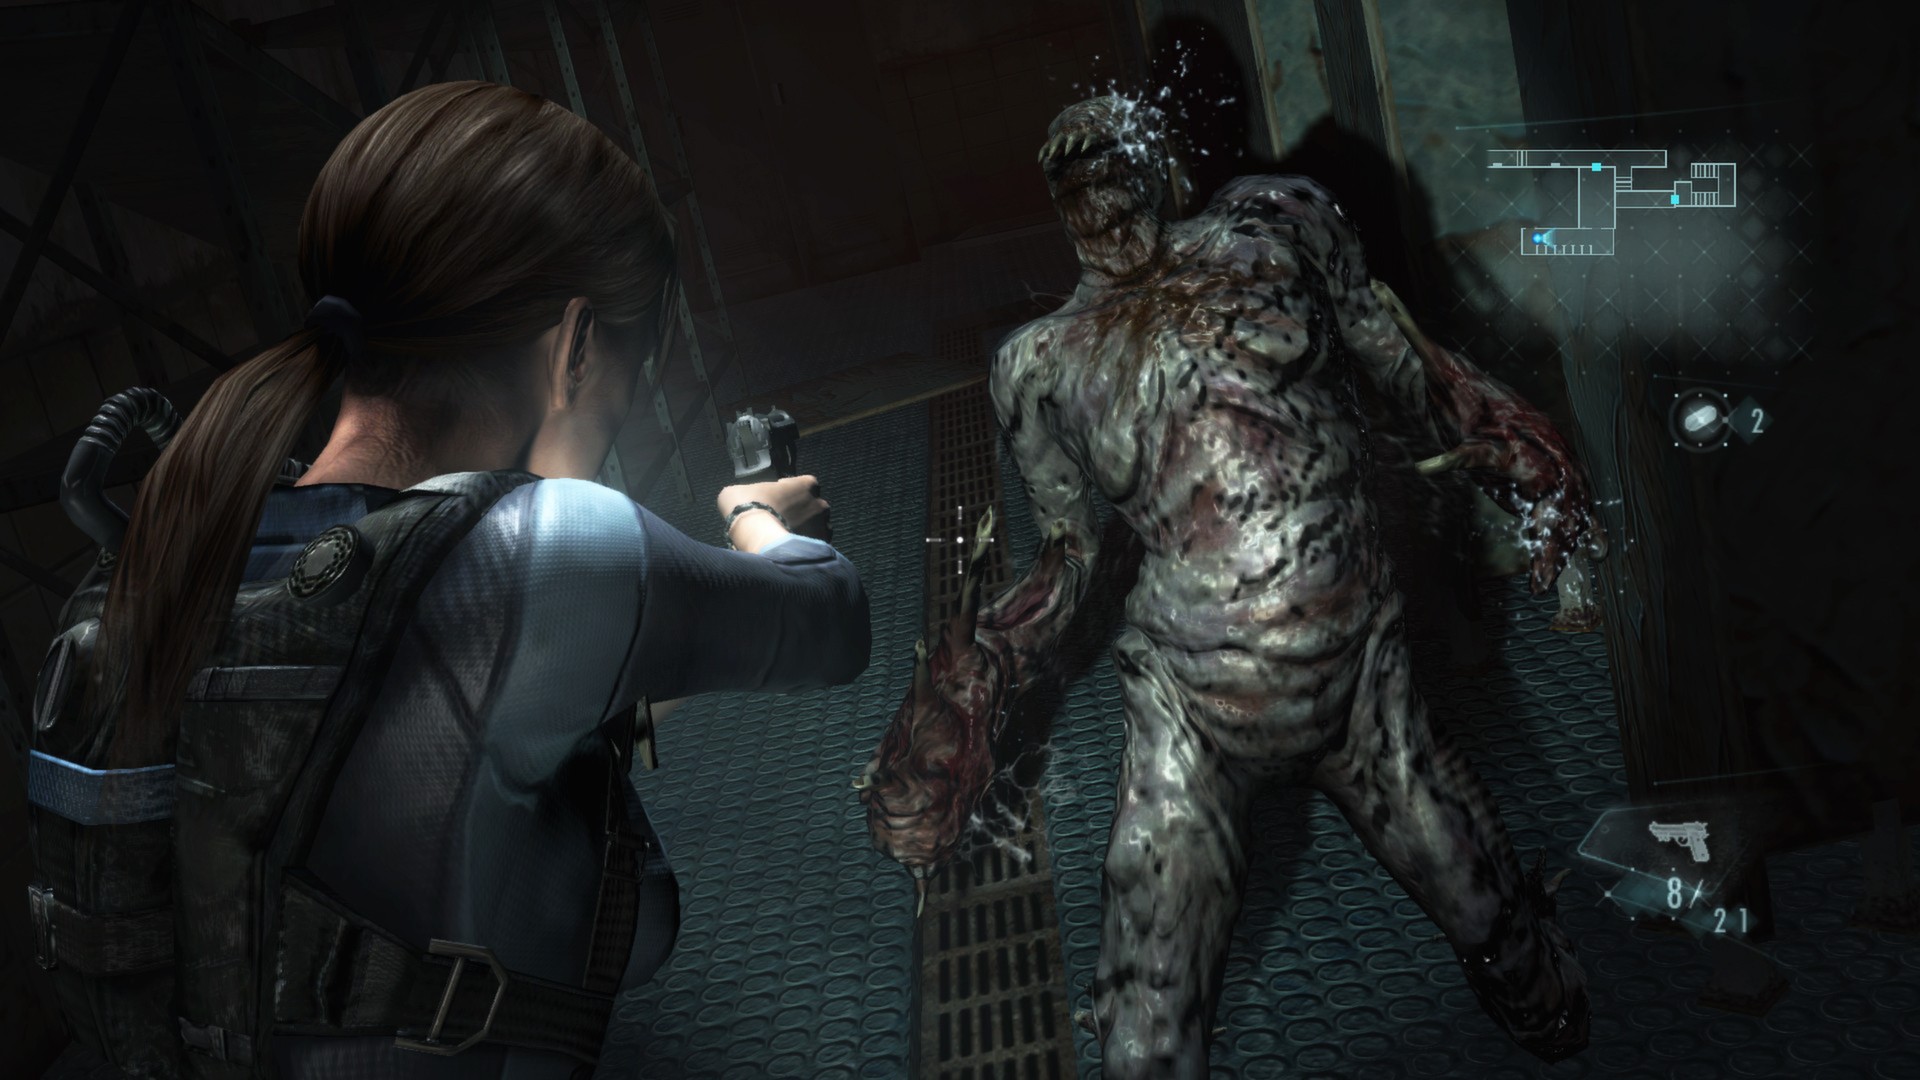 Resident Evil 5 2009 PC Version Vs 2016 Reveal Trailer: Graphics Comparison  Shows No Difference